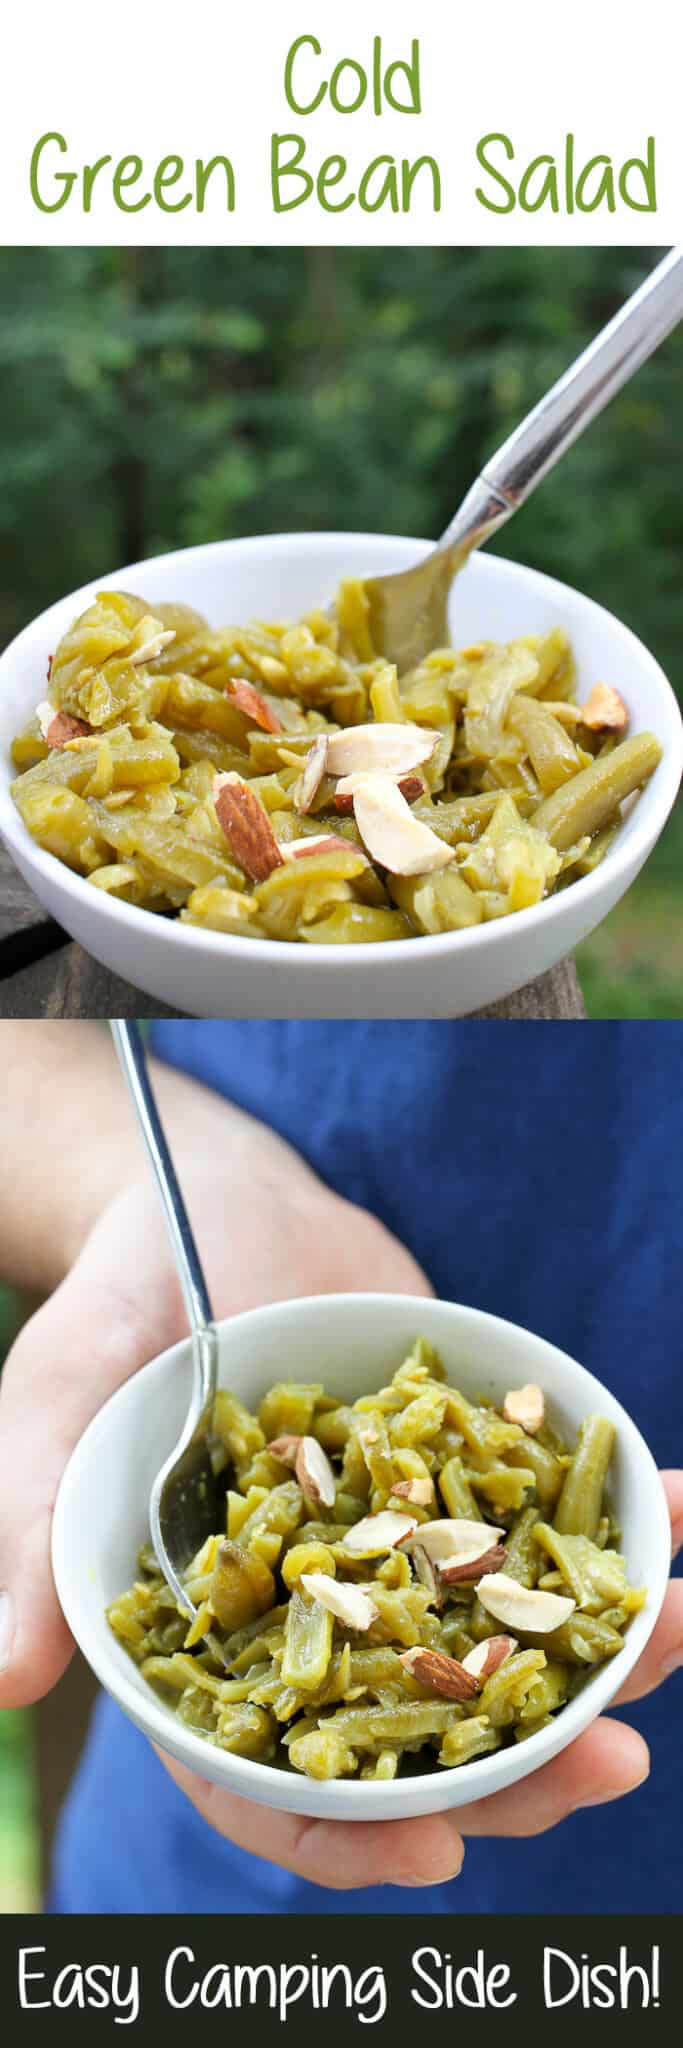 Easy Camping Side Dishes
 Camping Lunch Idea Green Bean Salad No Cook Perfect